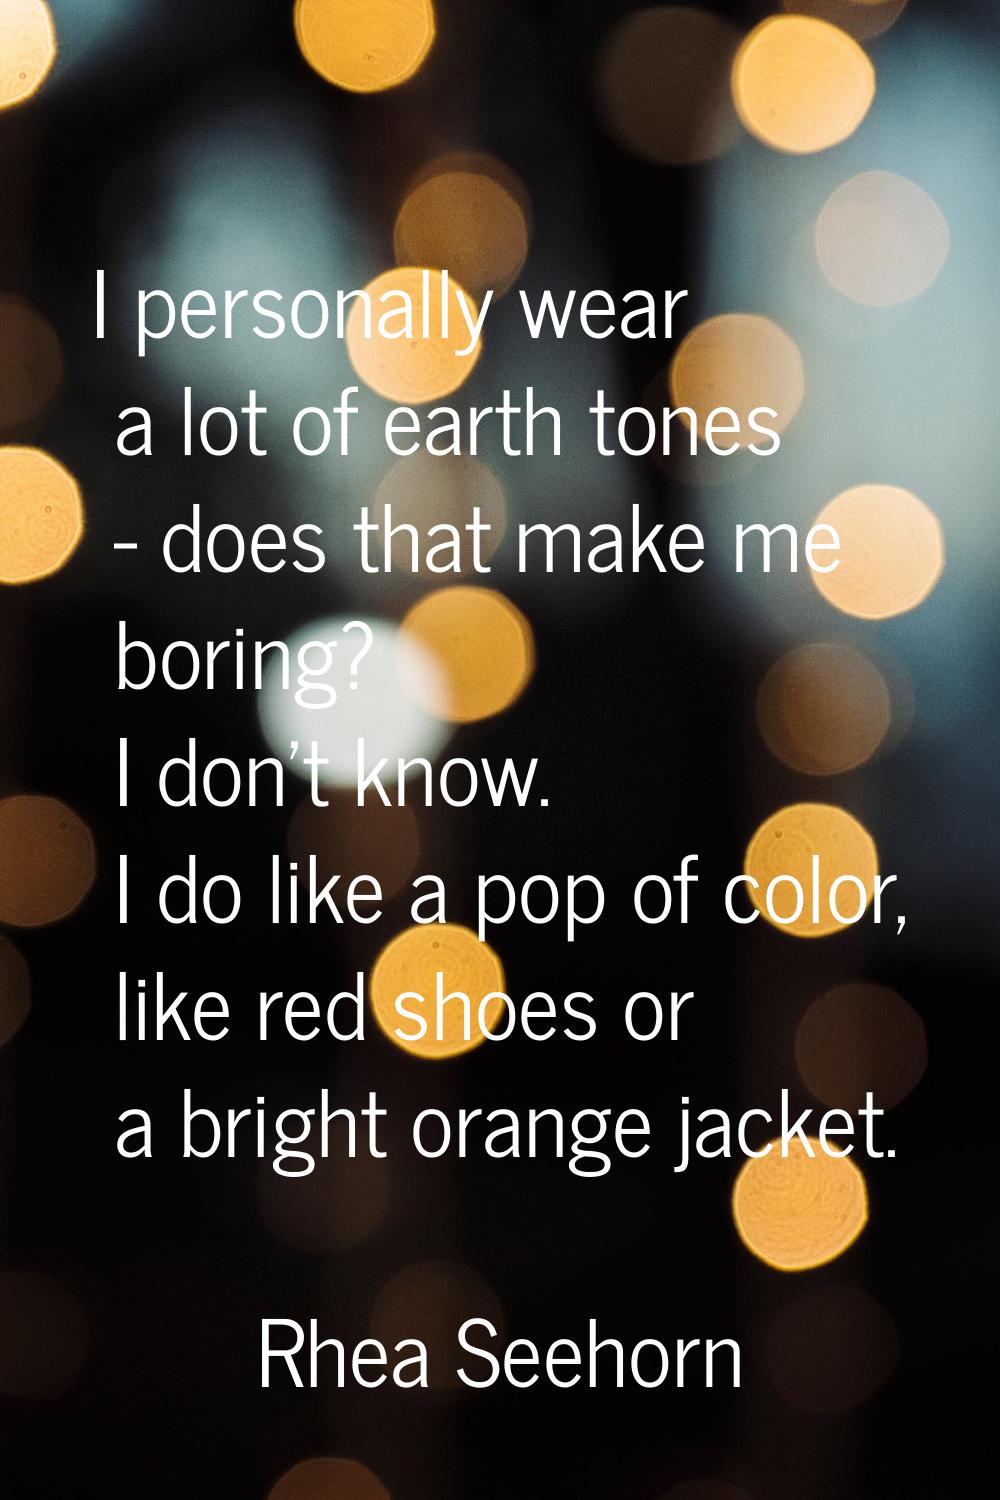 I personally wear a lot of earth tones - does that make me boring? I don't know. I do like a pop of